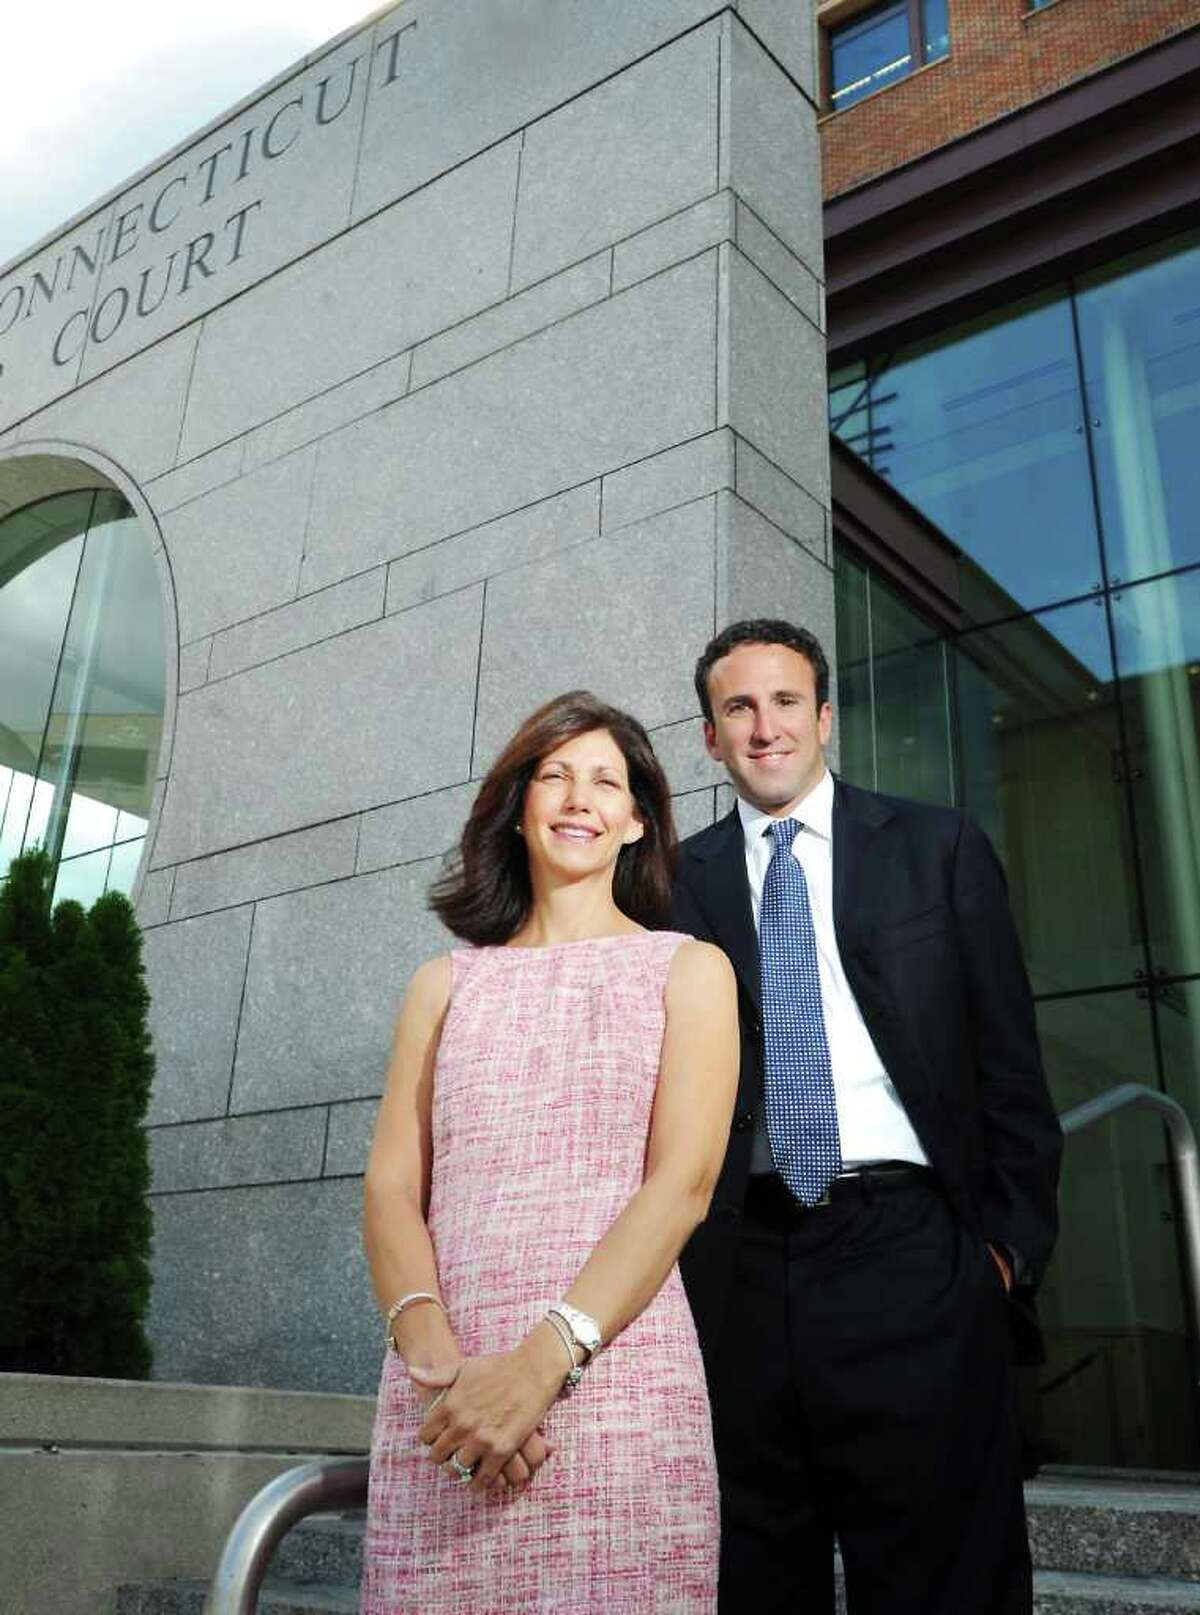 Karen Kaiser stands with her attorney Mark Sherman in front of state Superior Court in Stamford, Conn. on Friday September 10, 2010. Kaiser's divorce lawsuit helped bring down Pequot Capital Management, the Wilton company that managed billions of dollars and was once among the world's biggest hedge funds.